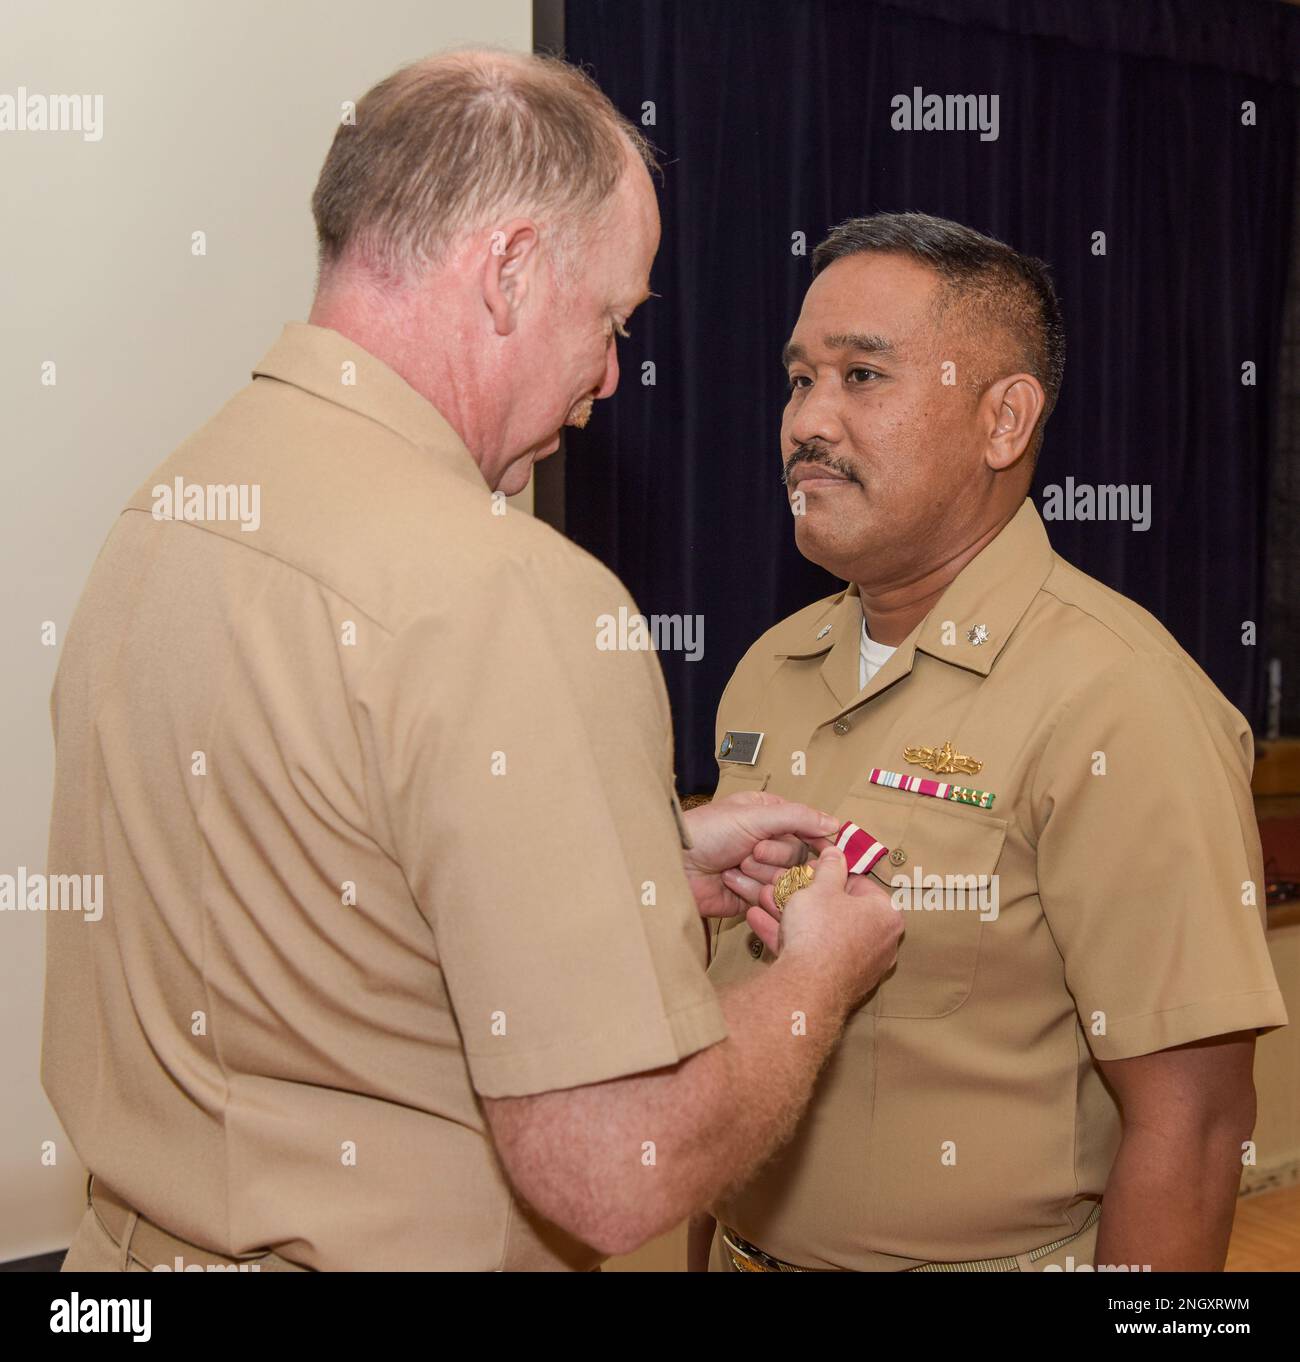 221130-N-EJ241-1032    Cmdr. Robert E. Bulatao, executive officer of U.S. Navy Support Facility (NSF) Diego Garcia, receives a Meritorious Service Medal from Capt. John F. Wilson, commanding officer of NSF Diego Garcia, during a frocking ceremony at Diego Garcia Dec. 30, 2022. NSF Diego Garcia provides logistic, service, recreational, and administrative support to U.S. and allied forces forward deployed to the Indian Ocean and Arabian Gulf. Stock Photo